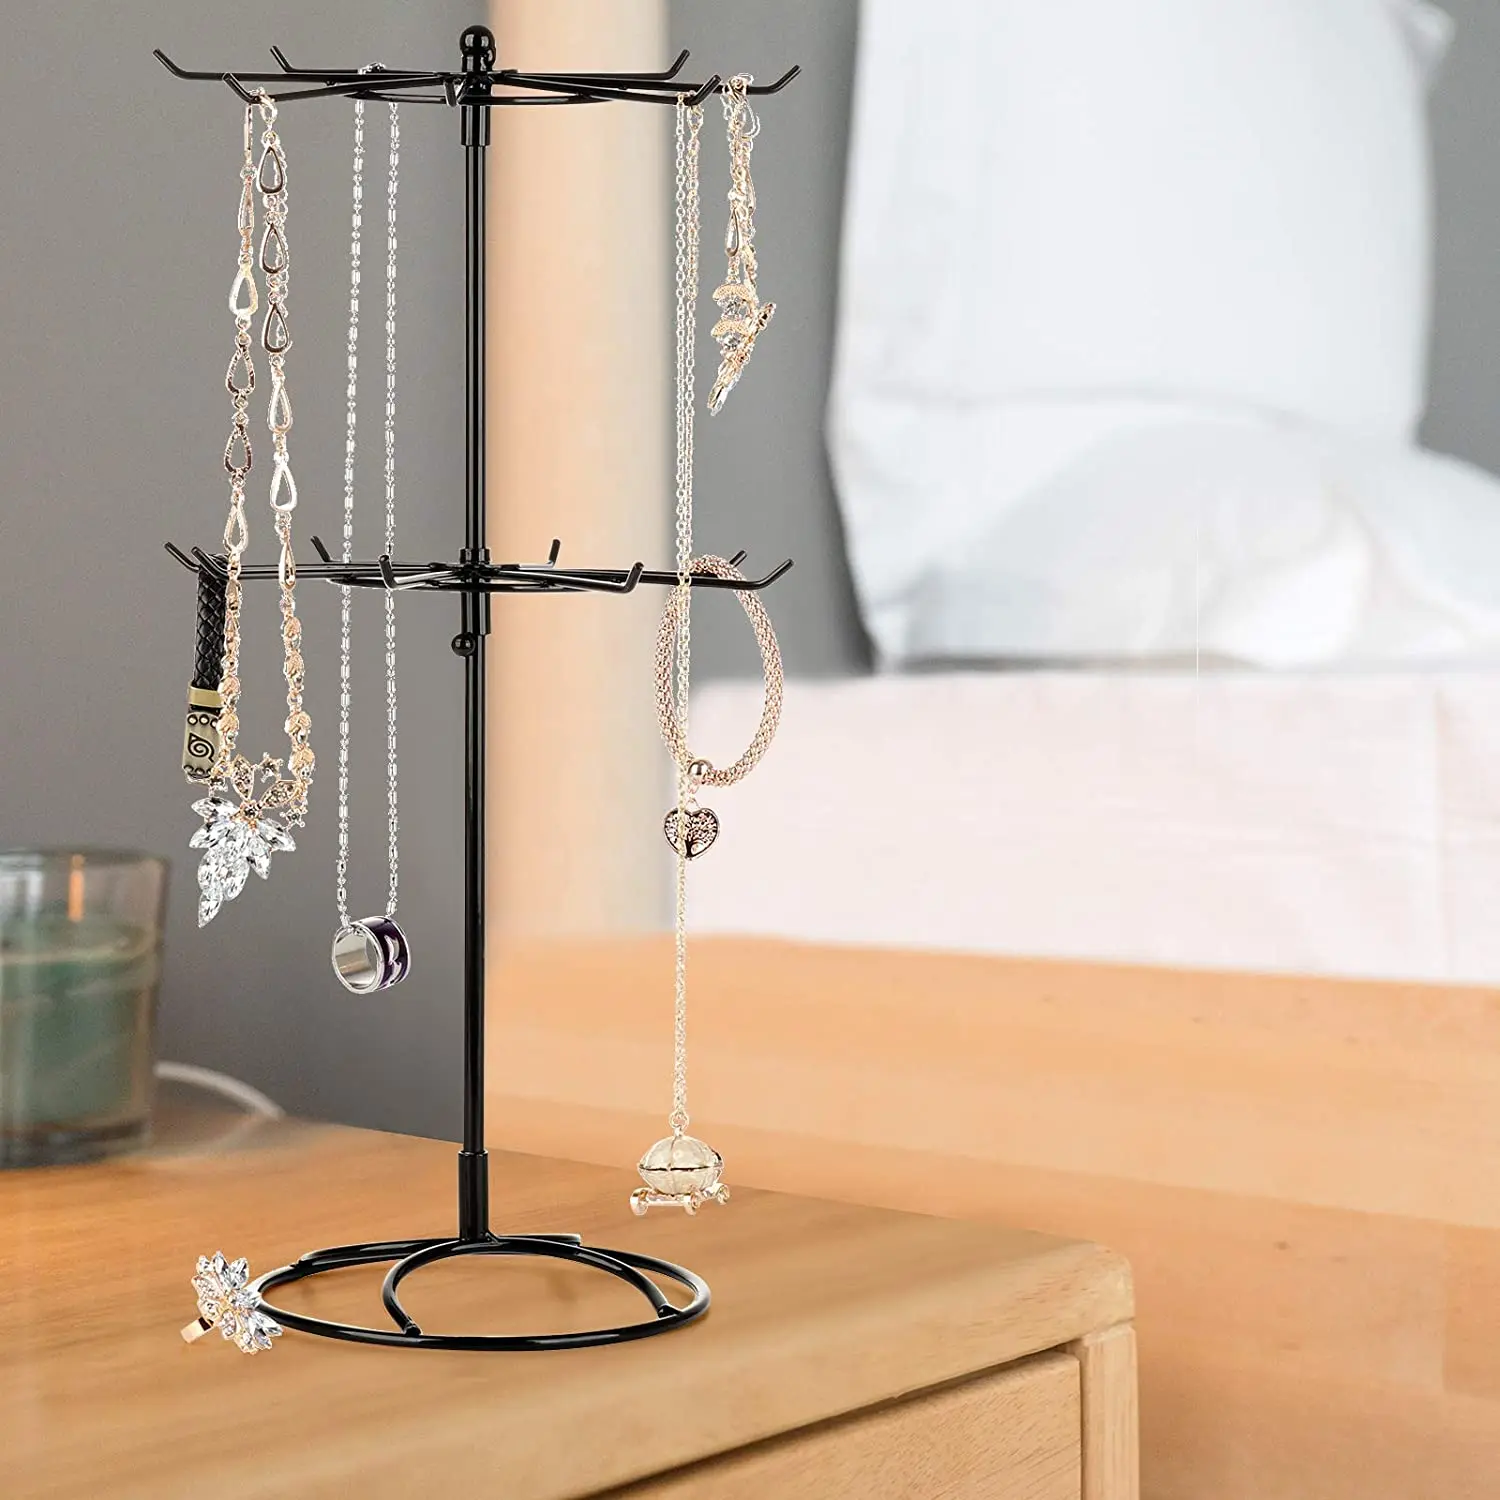 2 Tier Rotating Necklace Holder Jewelry Tree Bracelet Stand Display Organizer for Necklaces, Bracelets, Earrings, Rings